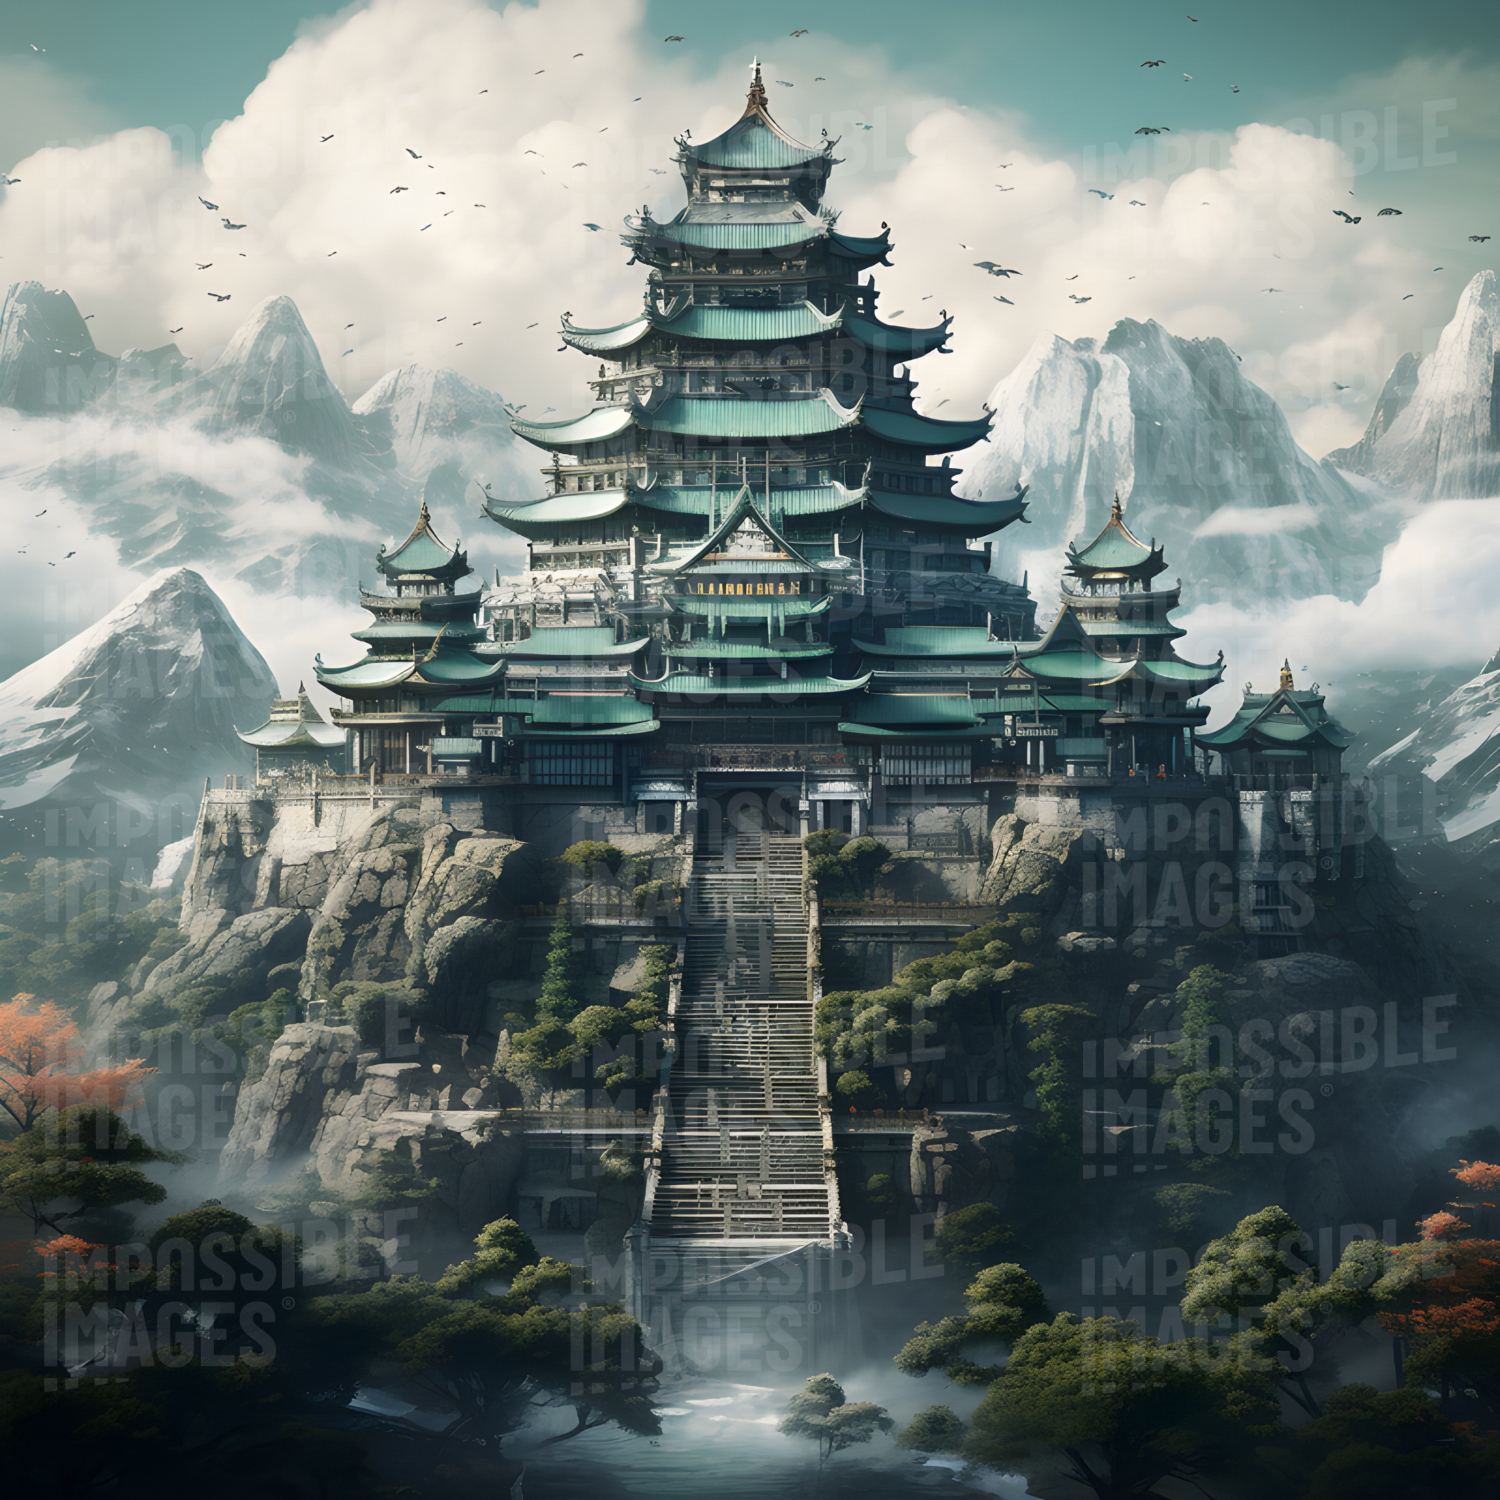 Concept art of a fantastic traditional Japanese fortress in the mountains